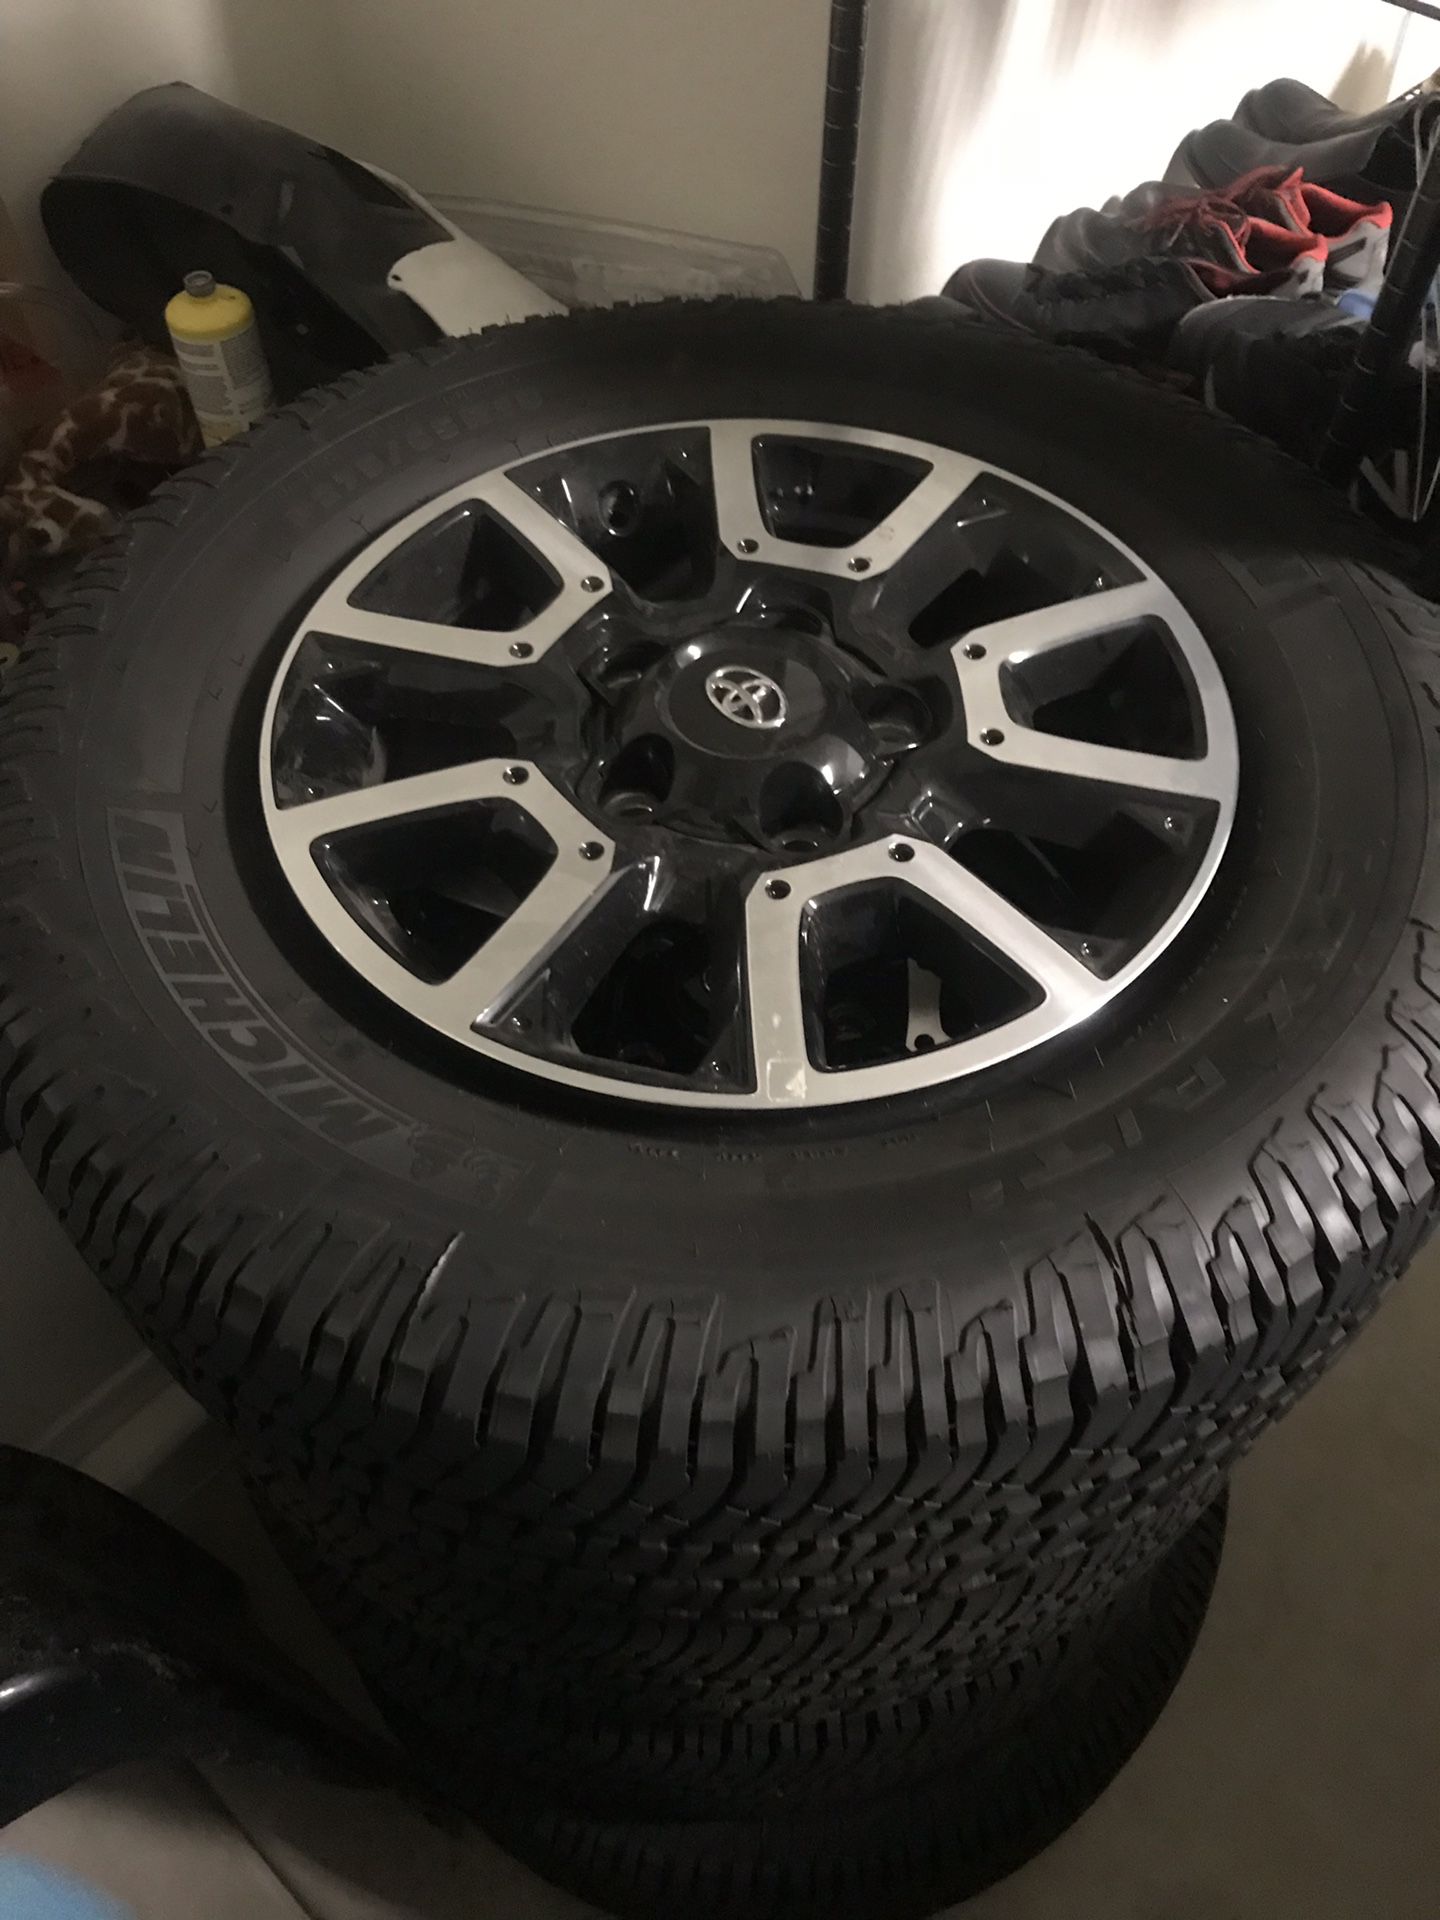 2019 Tundra TRD Wheels and Tires